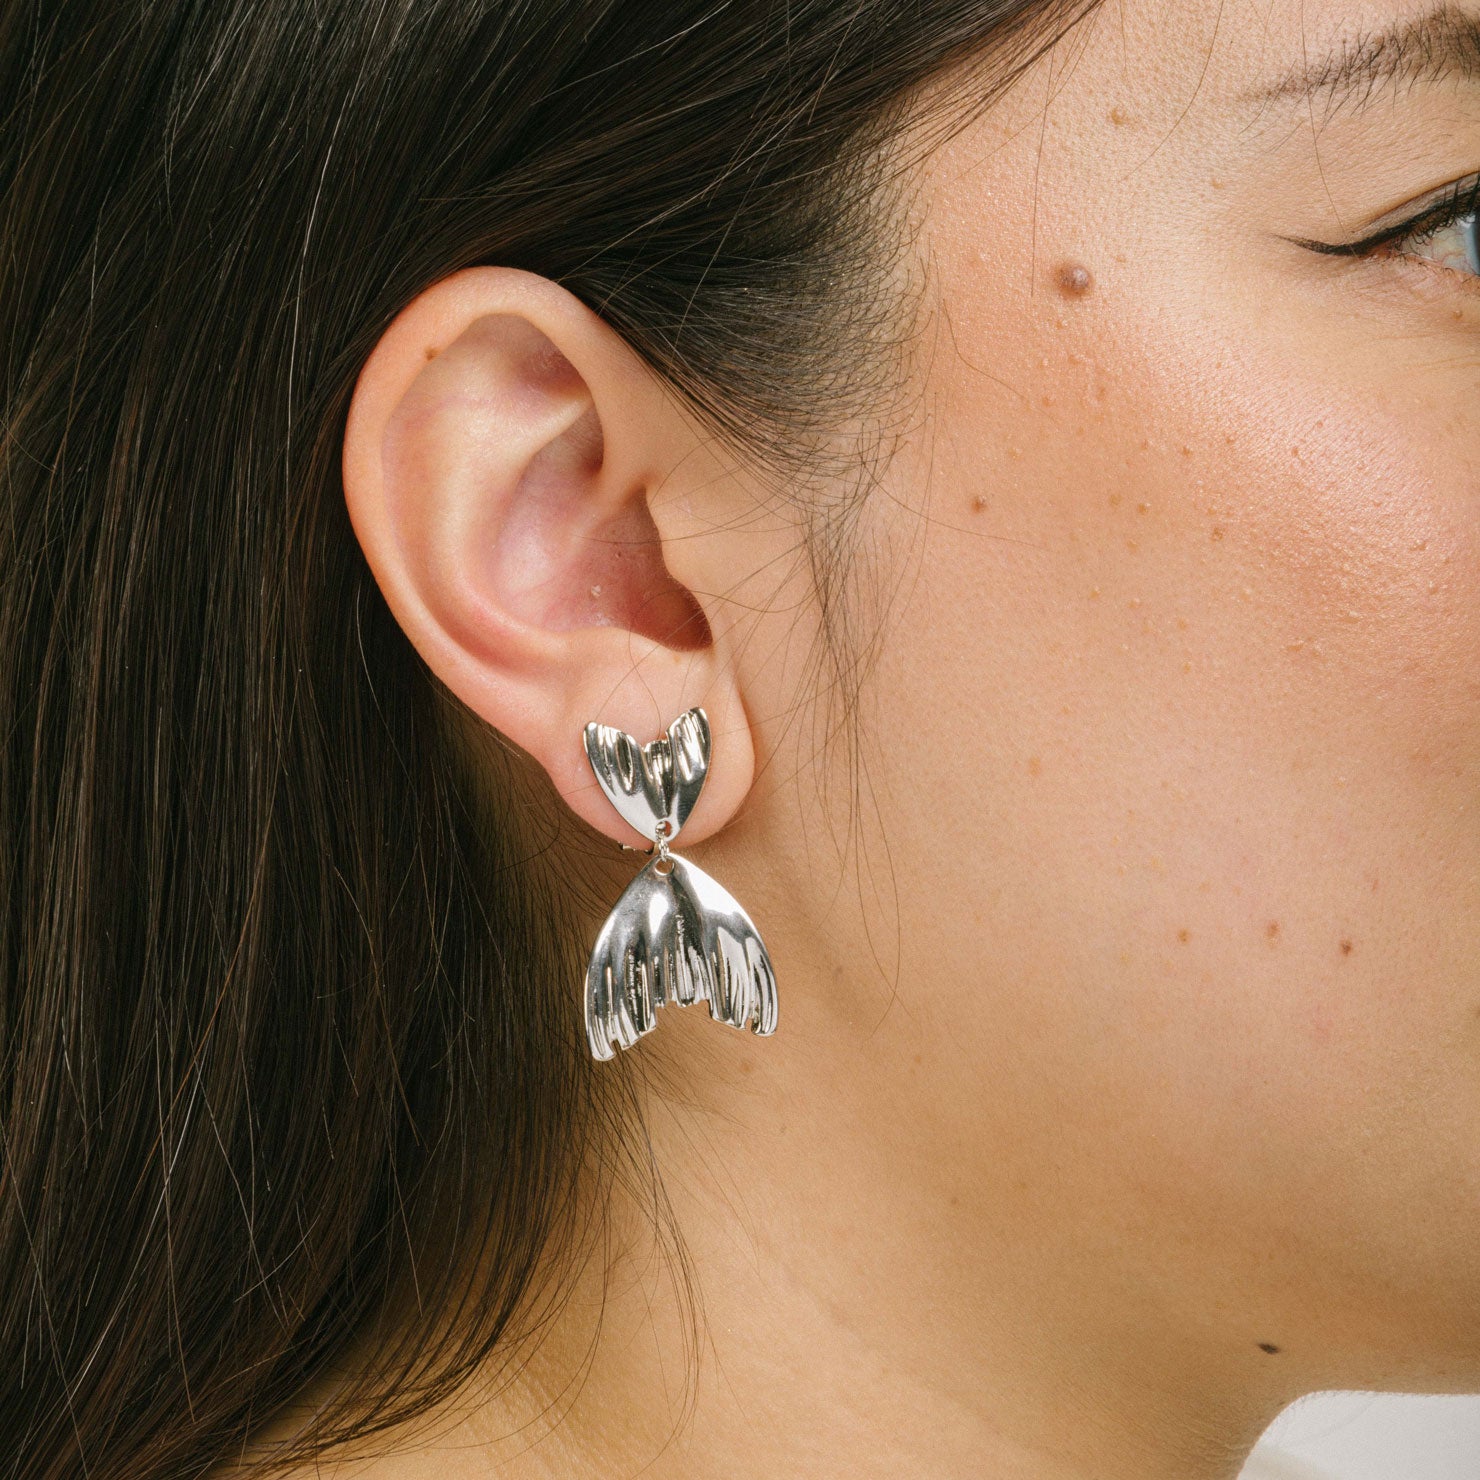 A model wearing the Mermaid Tail Clip On Earrings crafted in Silver Tone Zinc Alloy provide a secure hold for 8 to 12 hours. Padded Clip-On style is ideal for all ear types, and the earrings come as one pair with removable rubber padding. No adjustments possible.